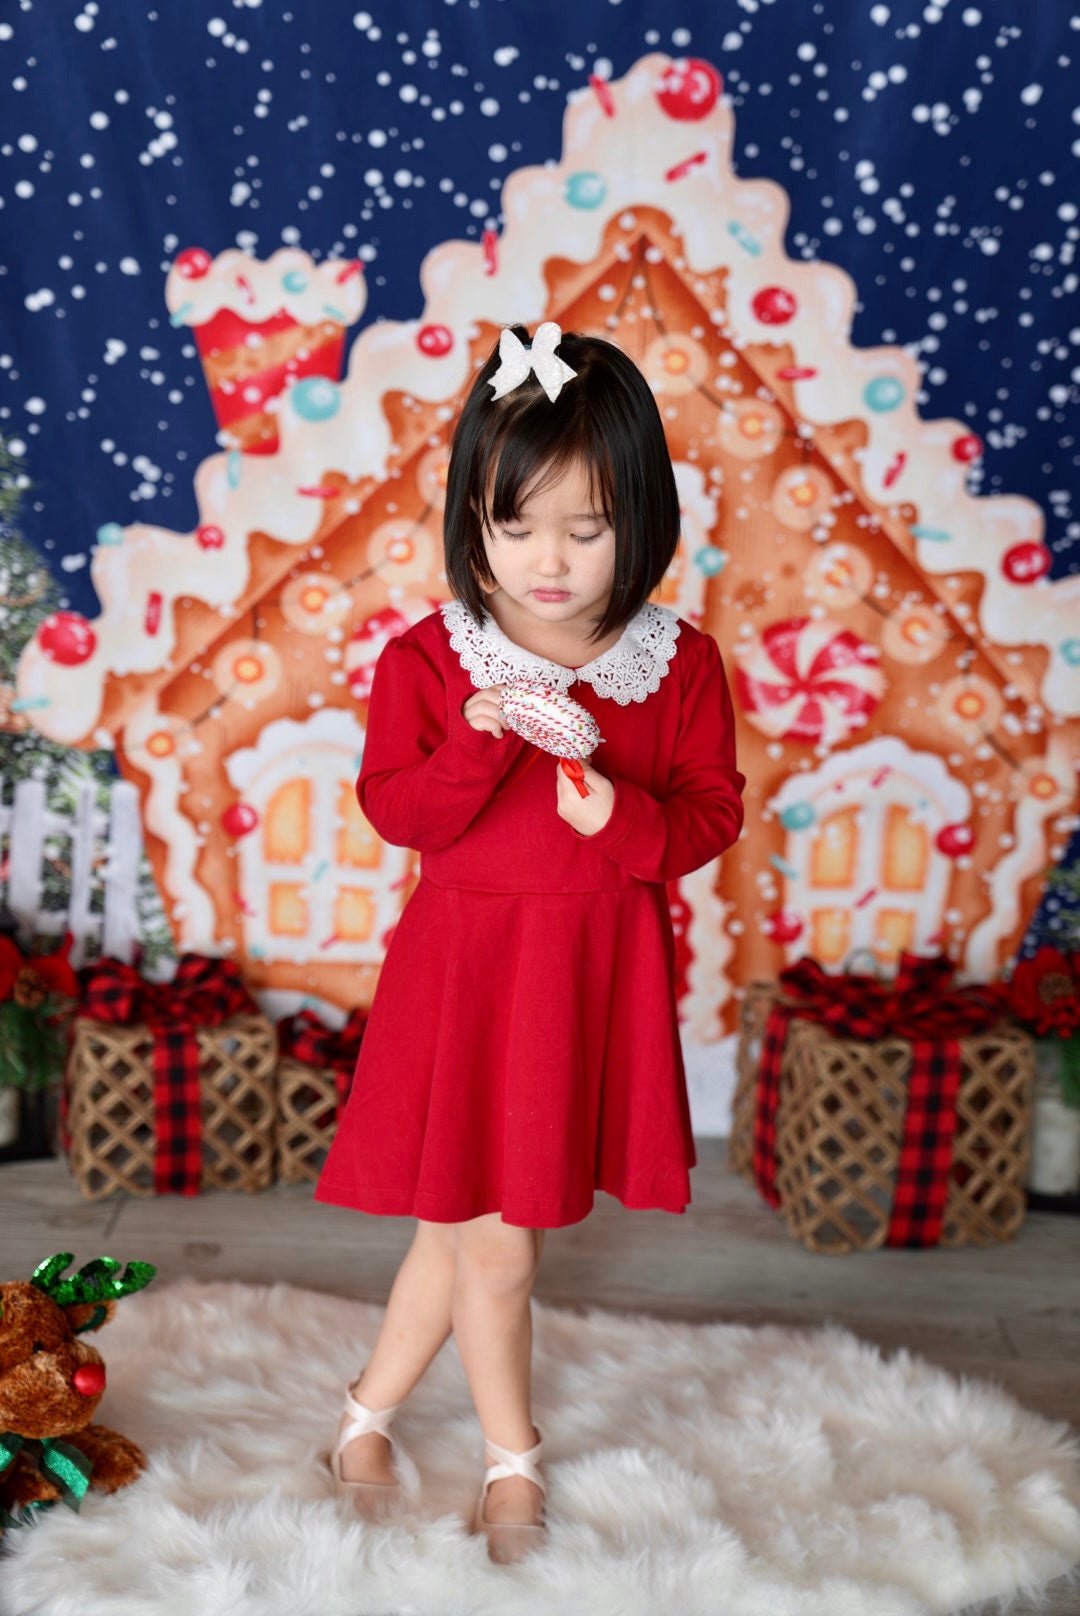 Kate Christmas Backdrop Candy House for Photography